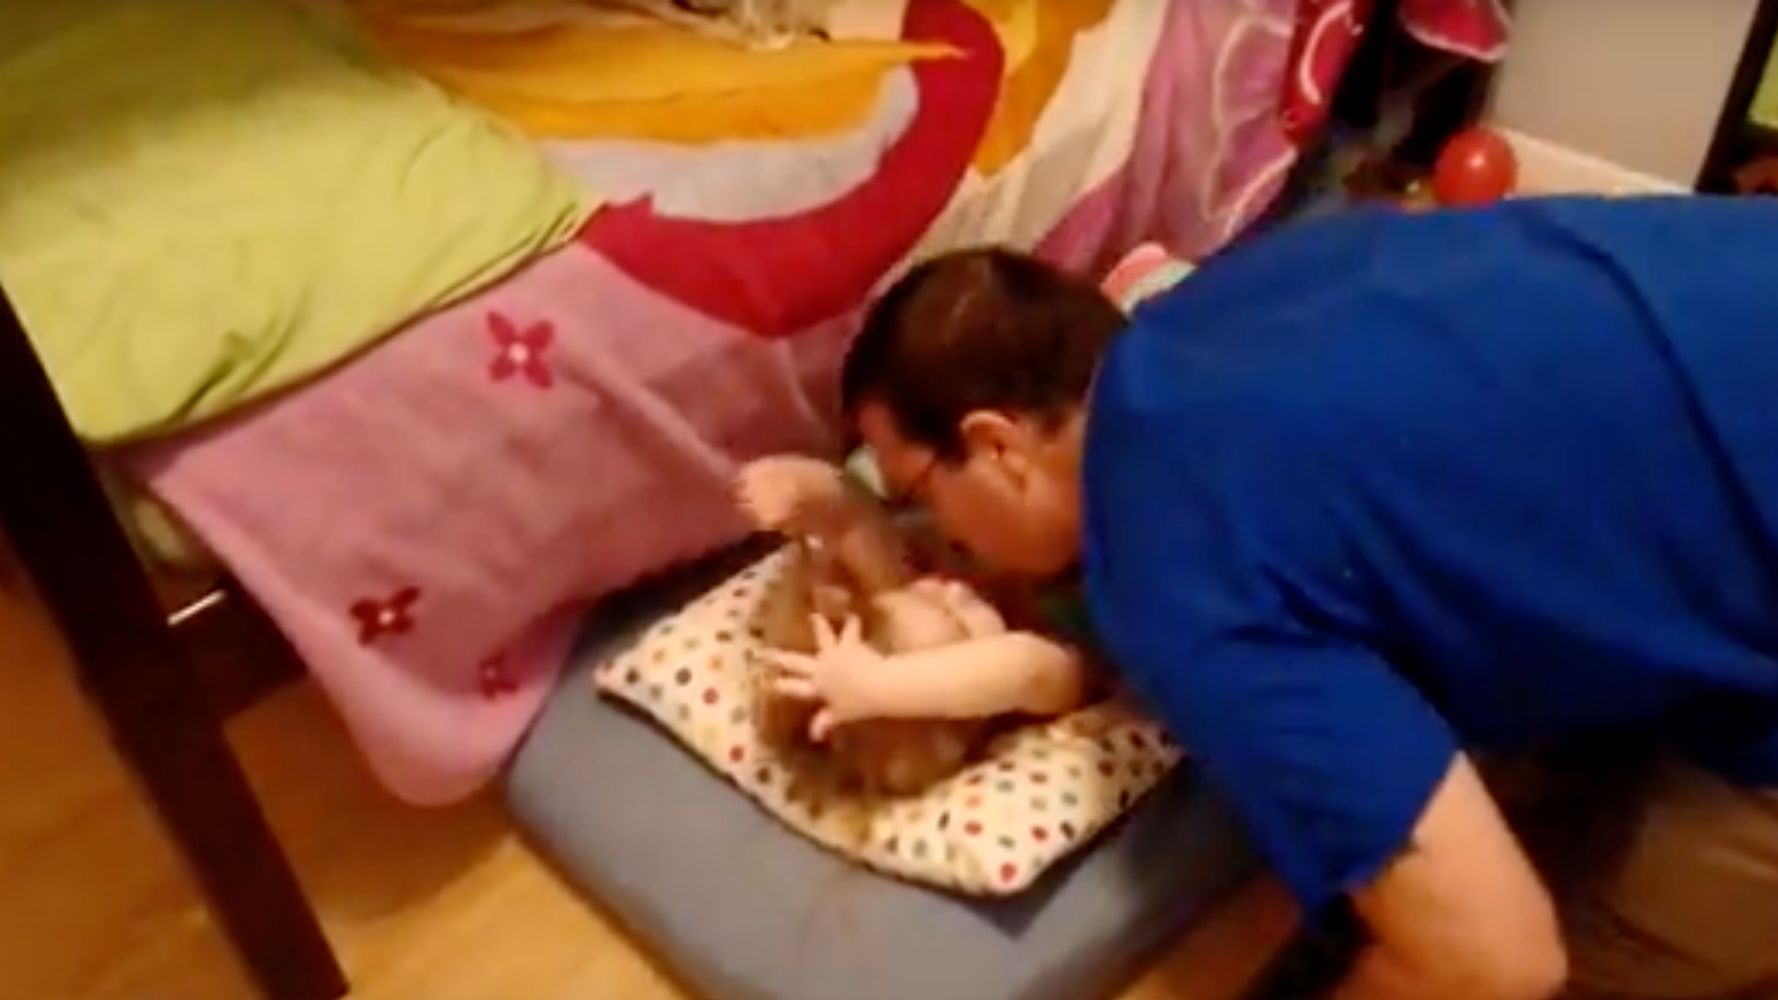 Mum And Dad Reveal How To 'Properly' Tuck Your Toddler Into Bed